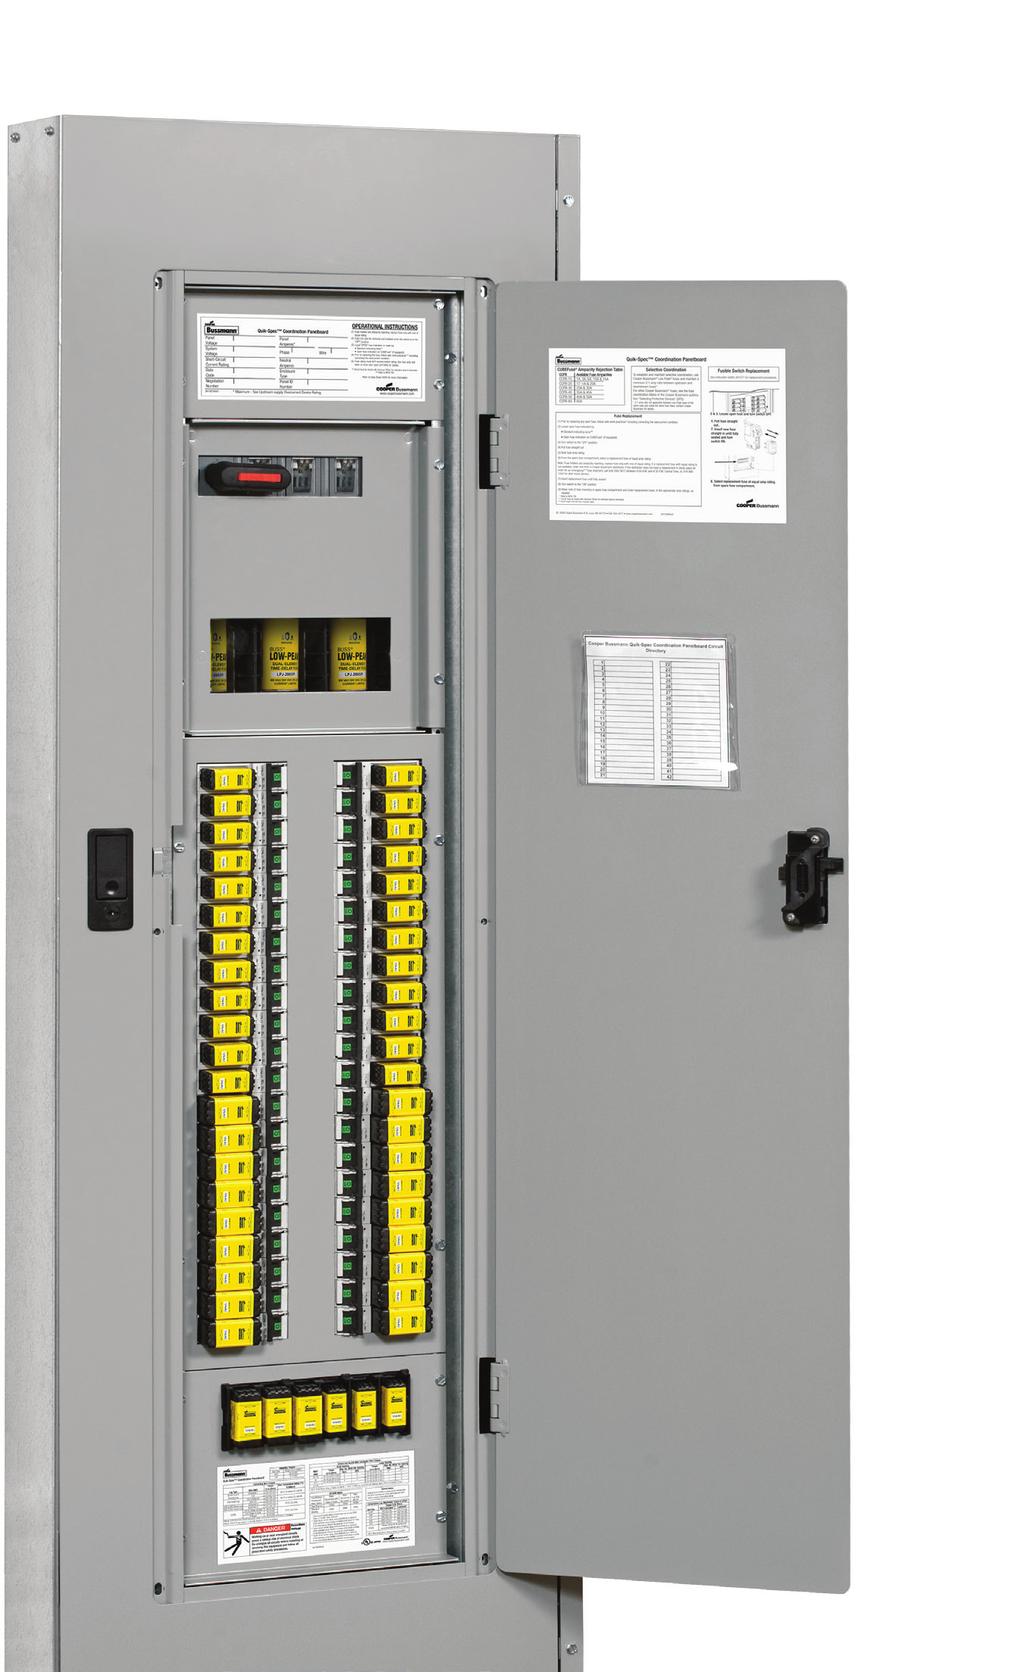 Bussmann series electrical gear Quik-Spec Power Module Elevator Disconnects Fusible power switch or panel with shunt trip and fire safety interface to allow for single point tie in with fire